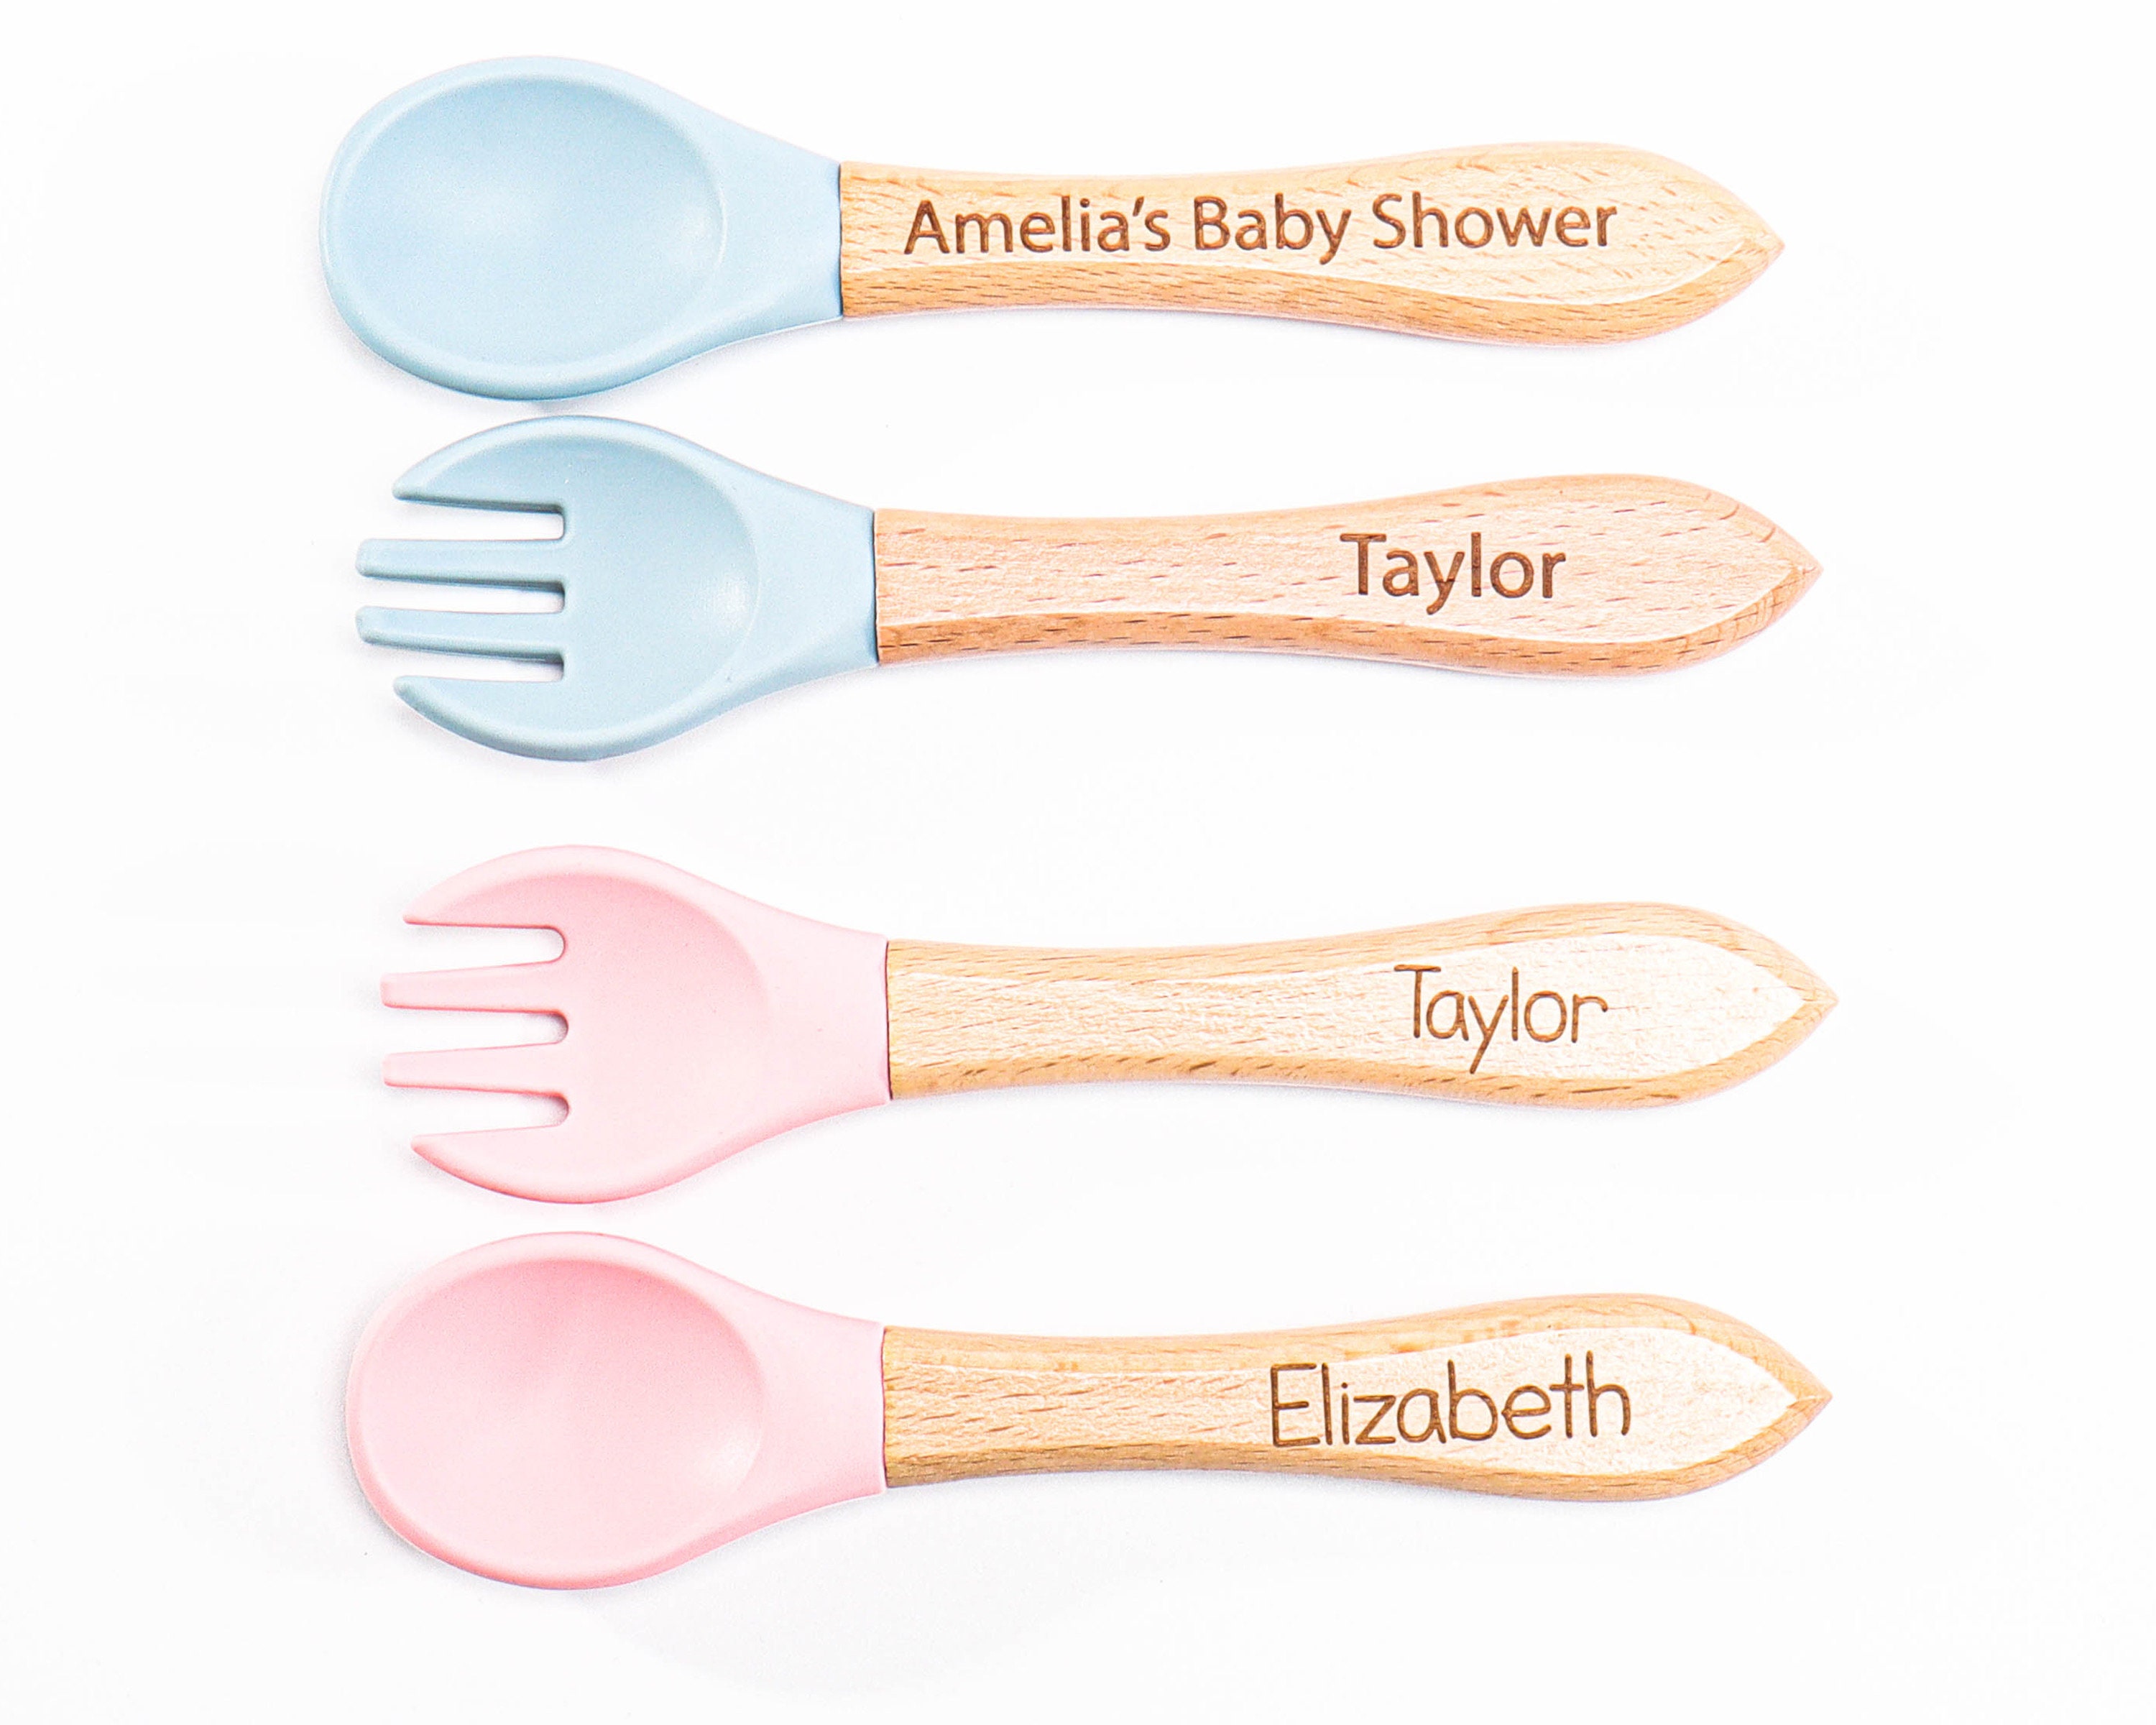 Baby Spoons Custom Engraved Baby's Name, Baby Shower Gift, Present,  Personalized Baby Safety Spoon, Munchkin White Hot, Pregnancy Reveal 